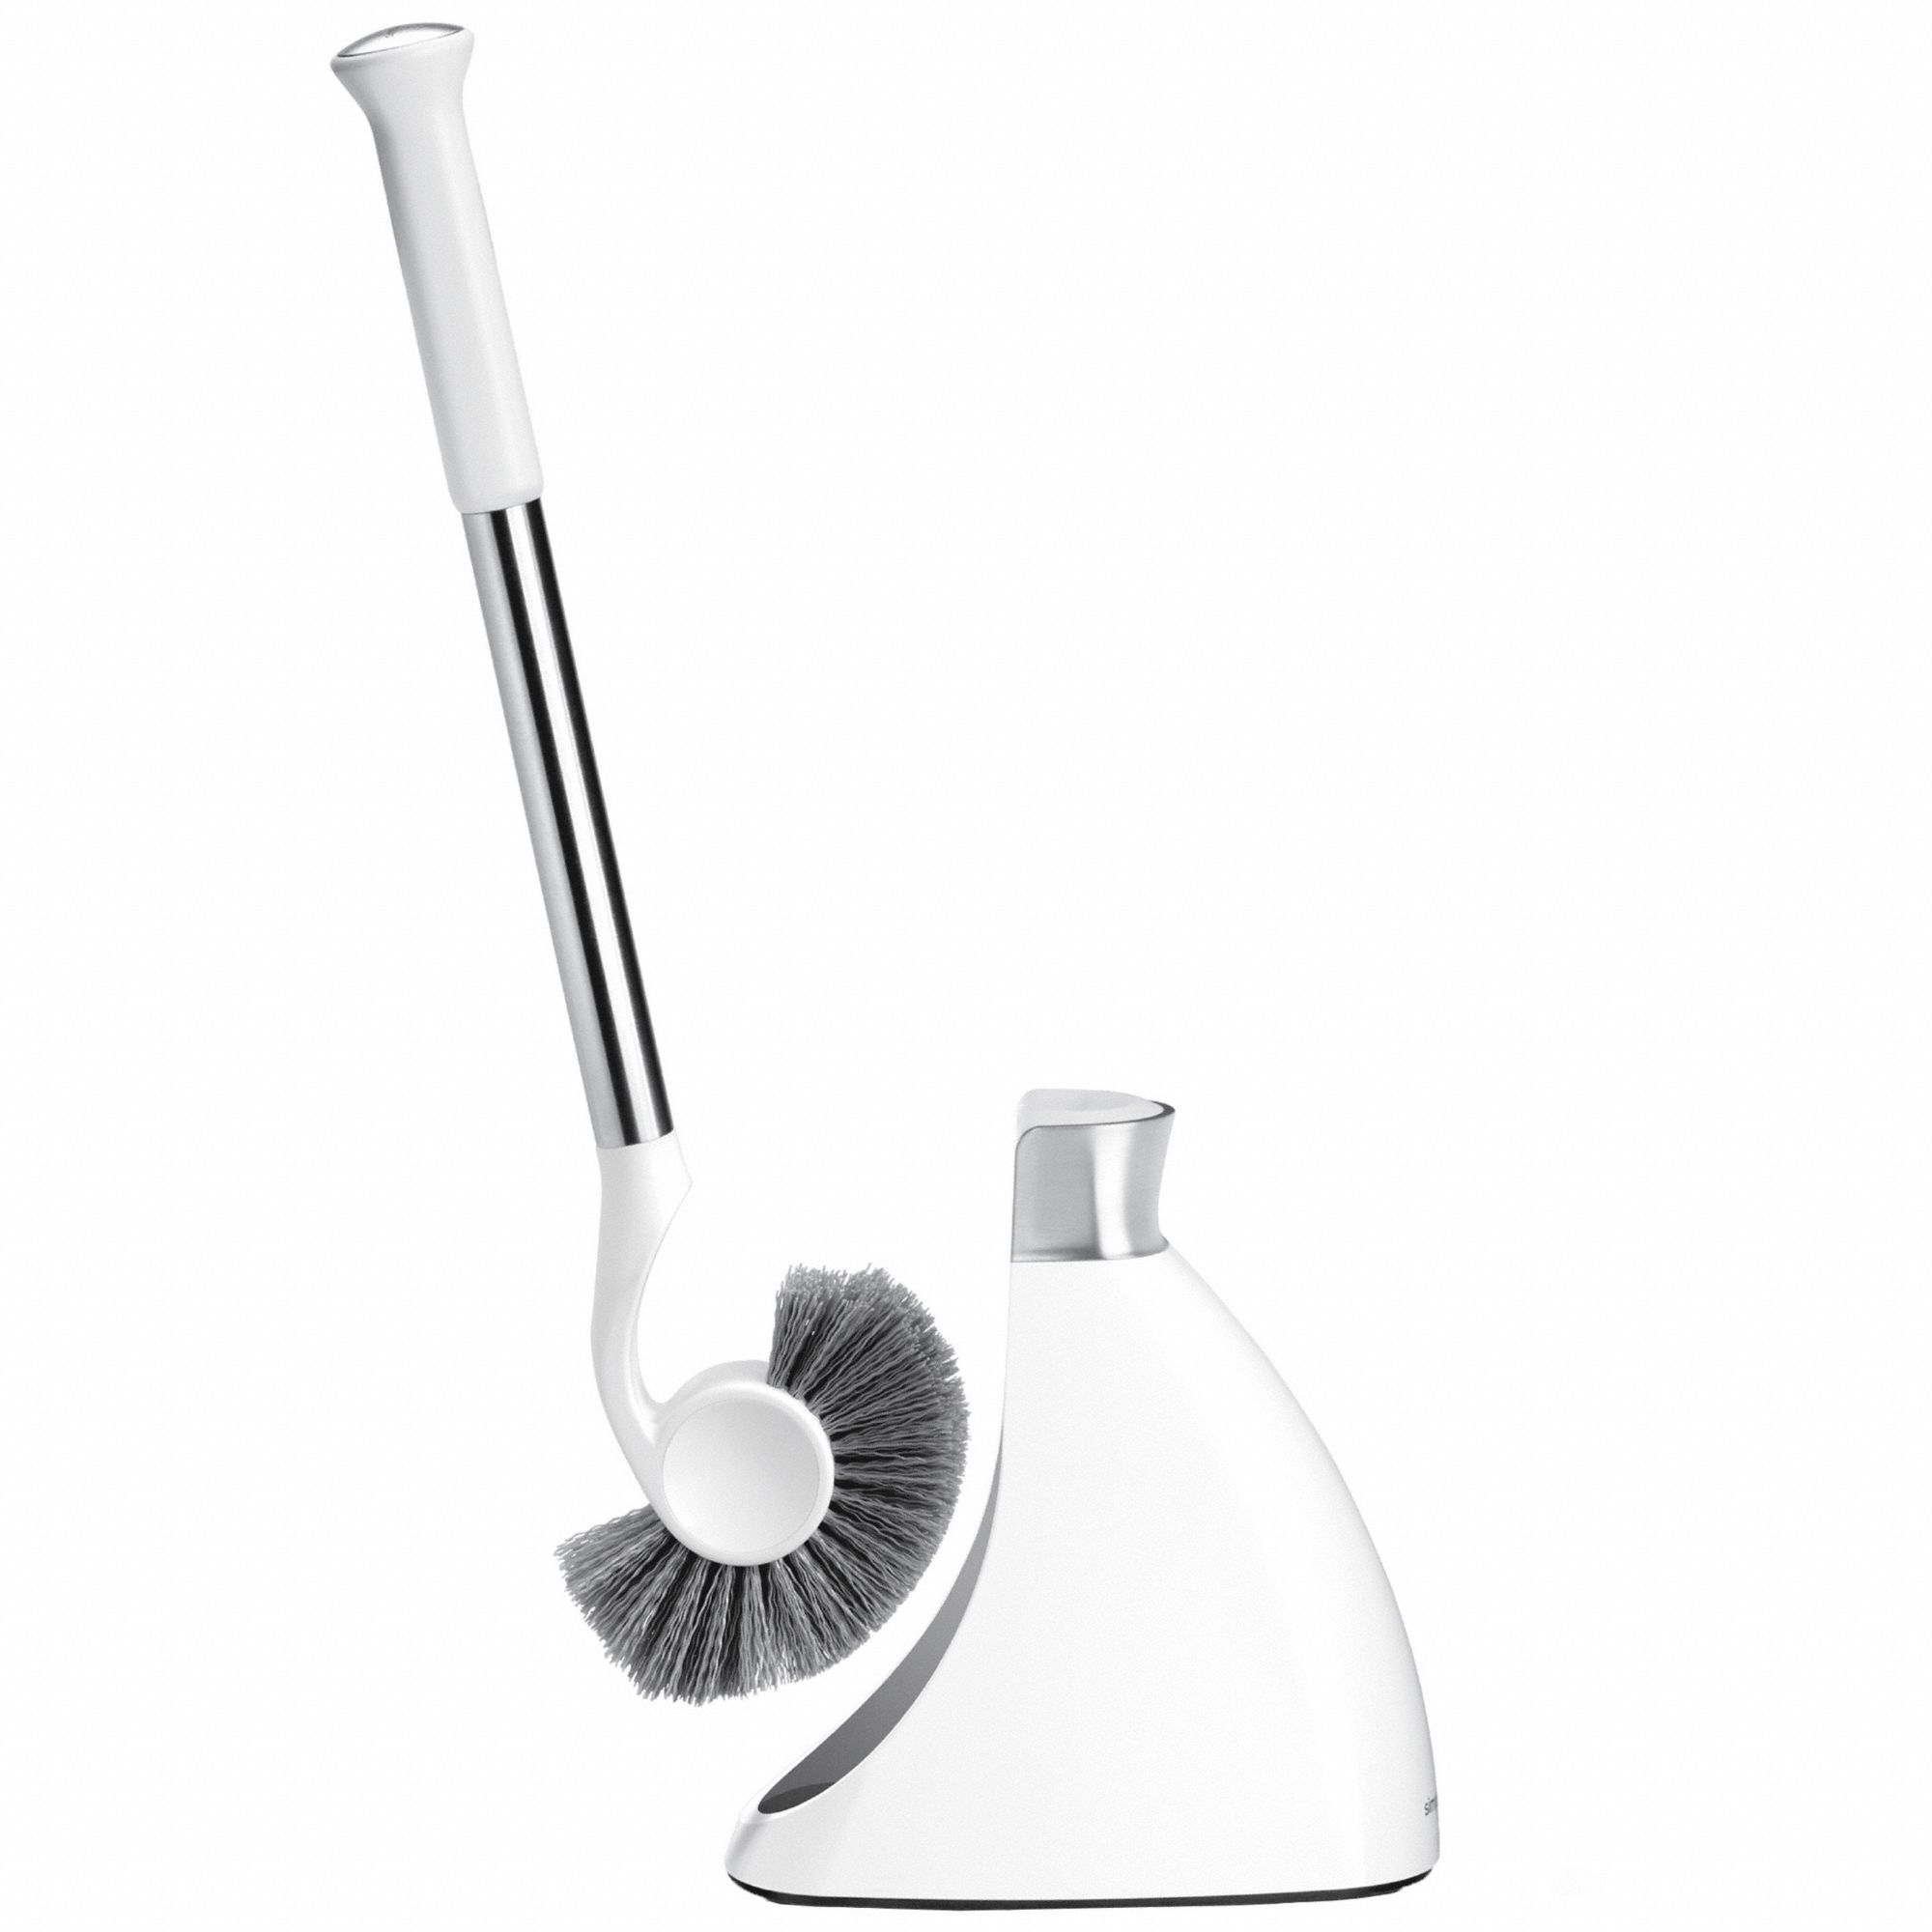 Toilet Brush with Caddy: Polypropylene, Gray, 1 1/2 in Brush Lg, Stainless Steel Handle